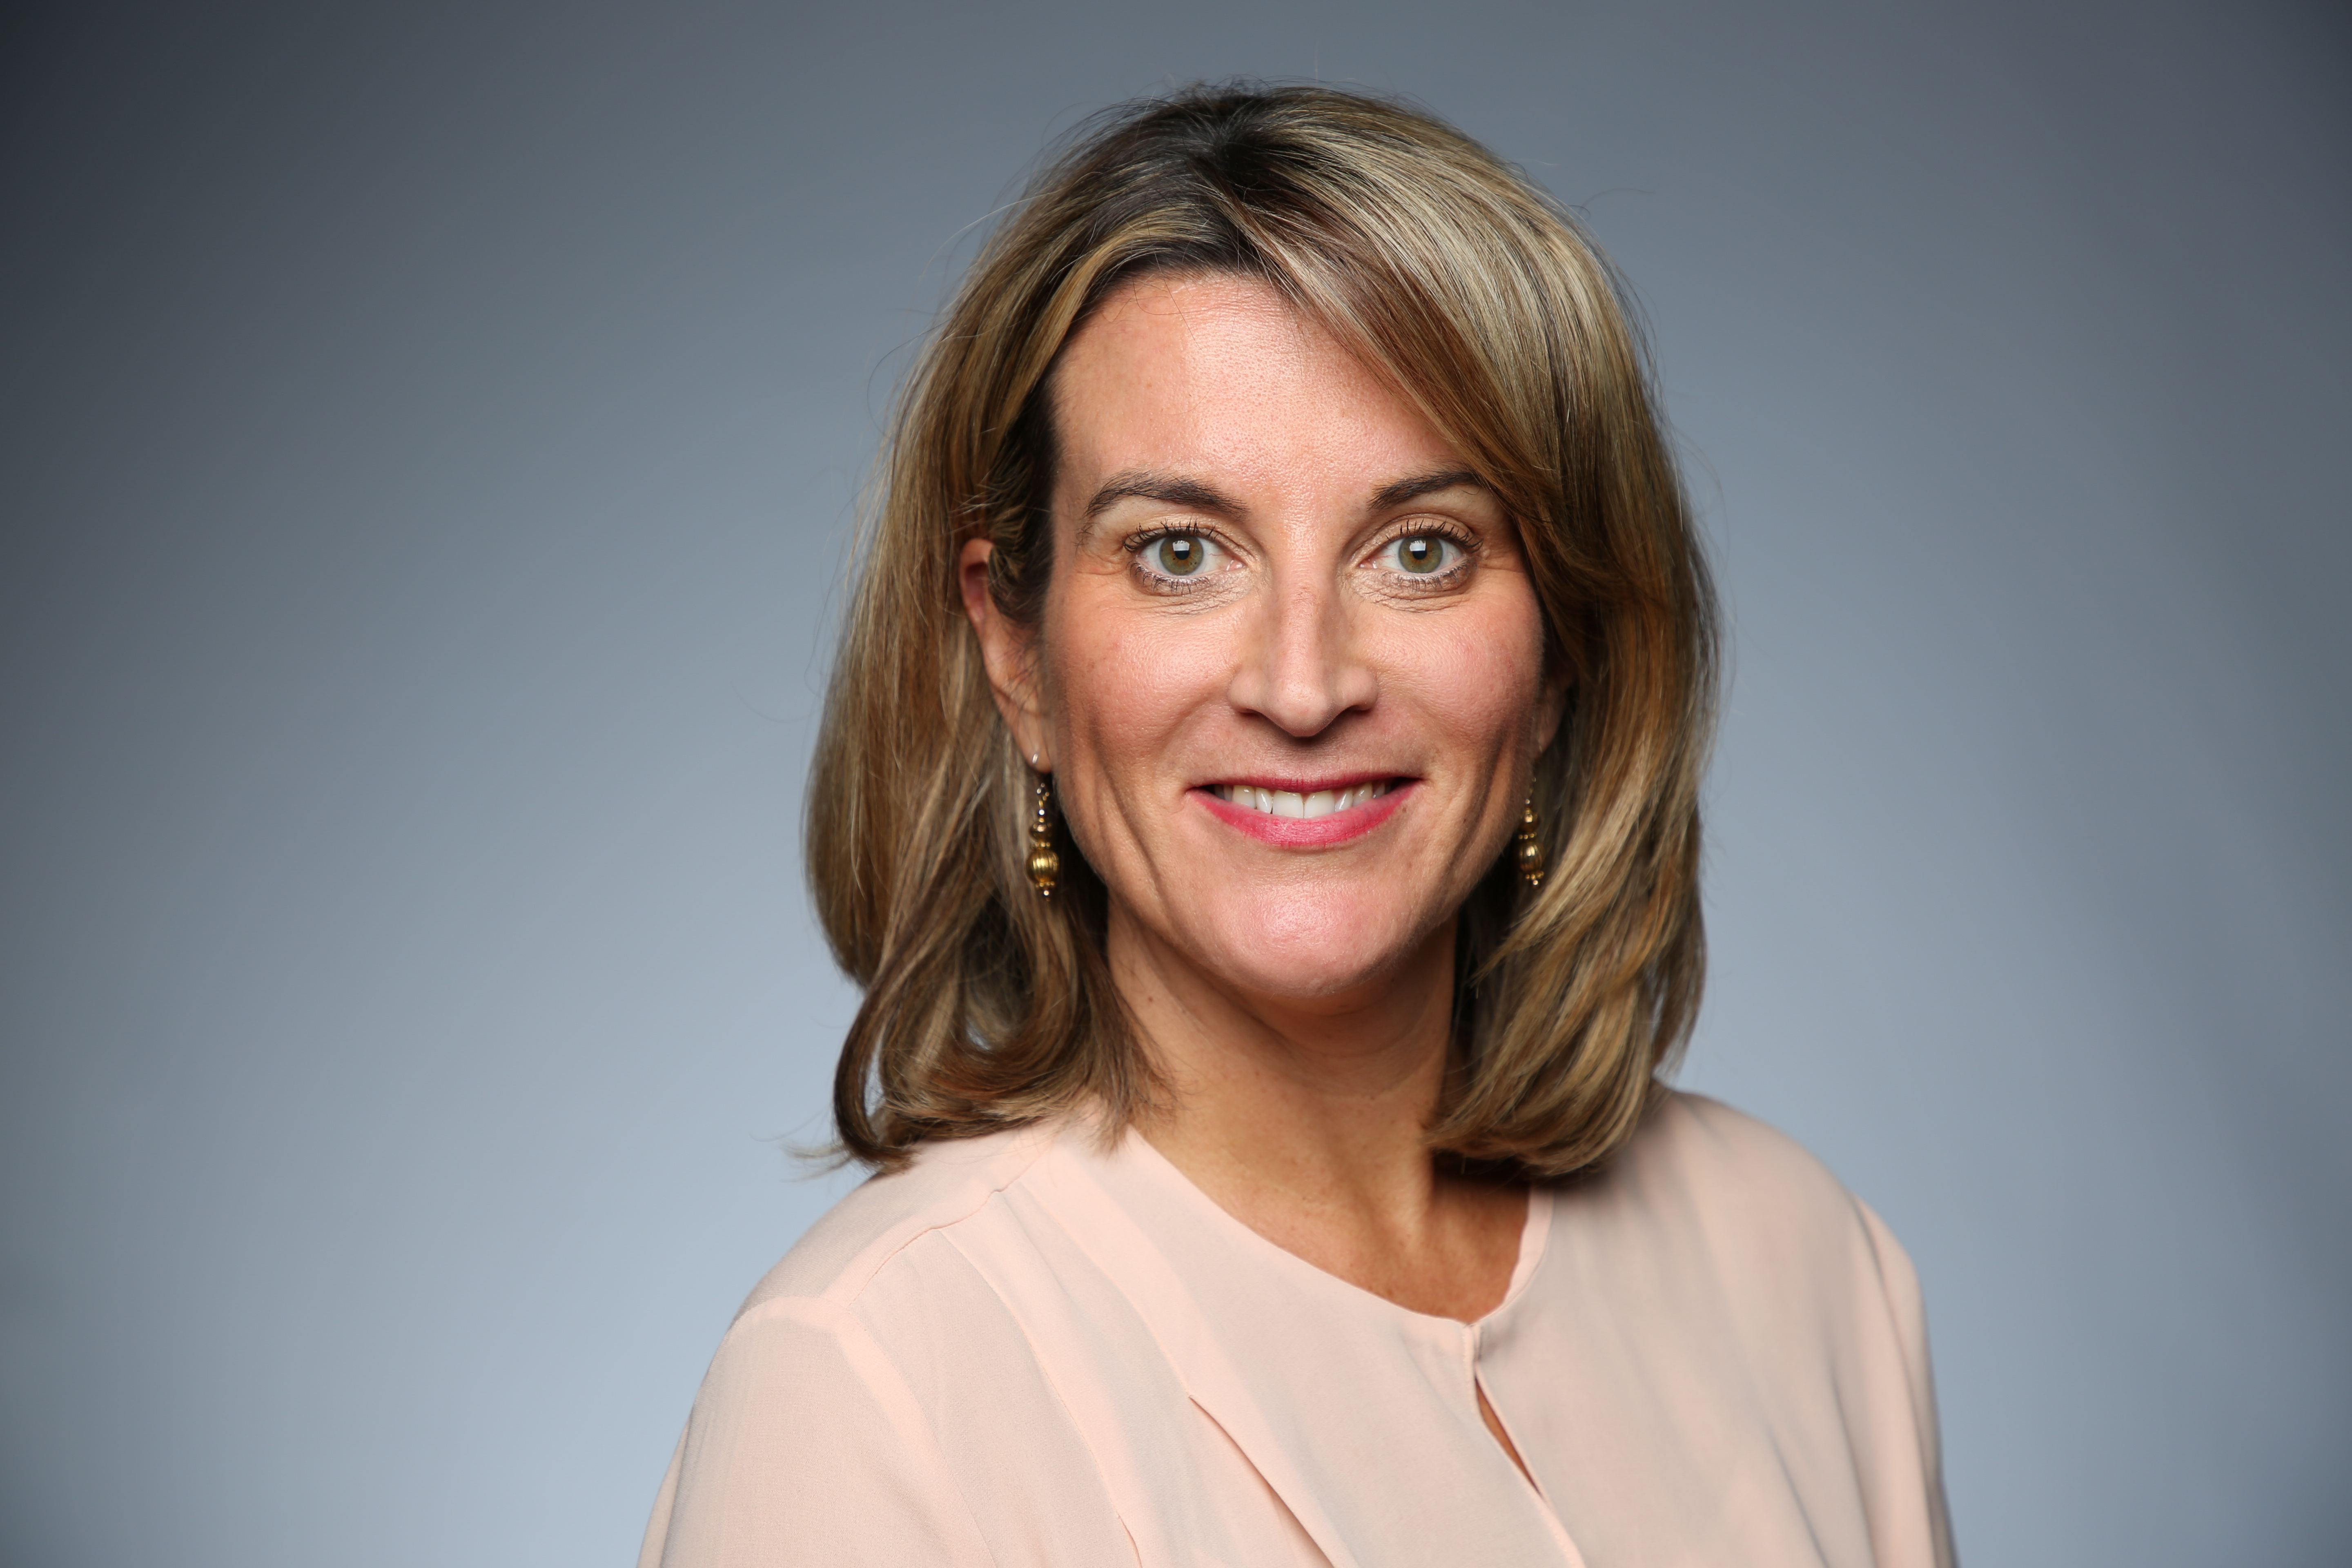 Alfresco Appoints Jennifer Smith As Chief Marketing And Culture Officer